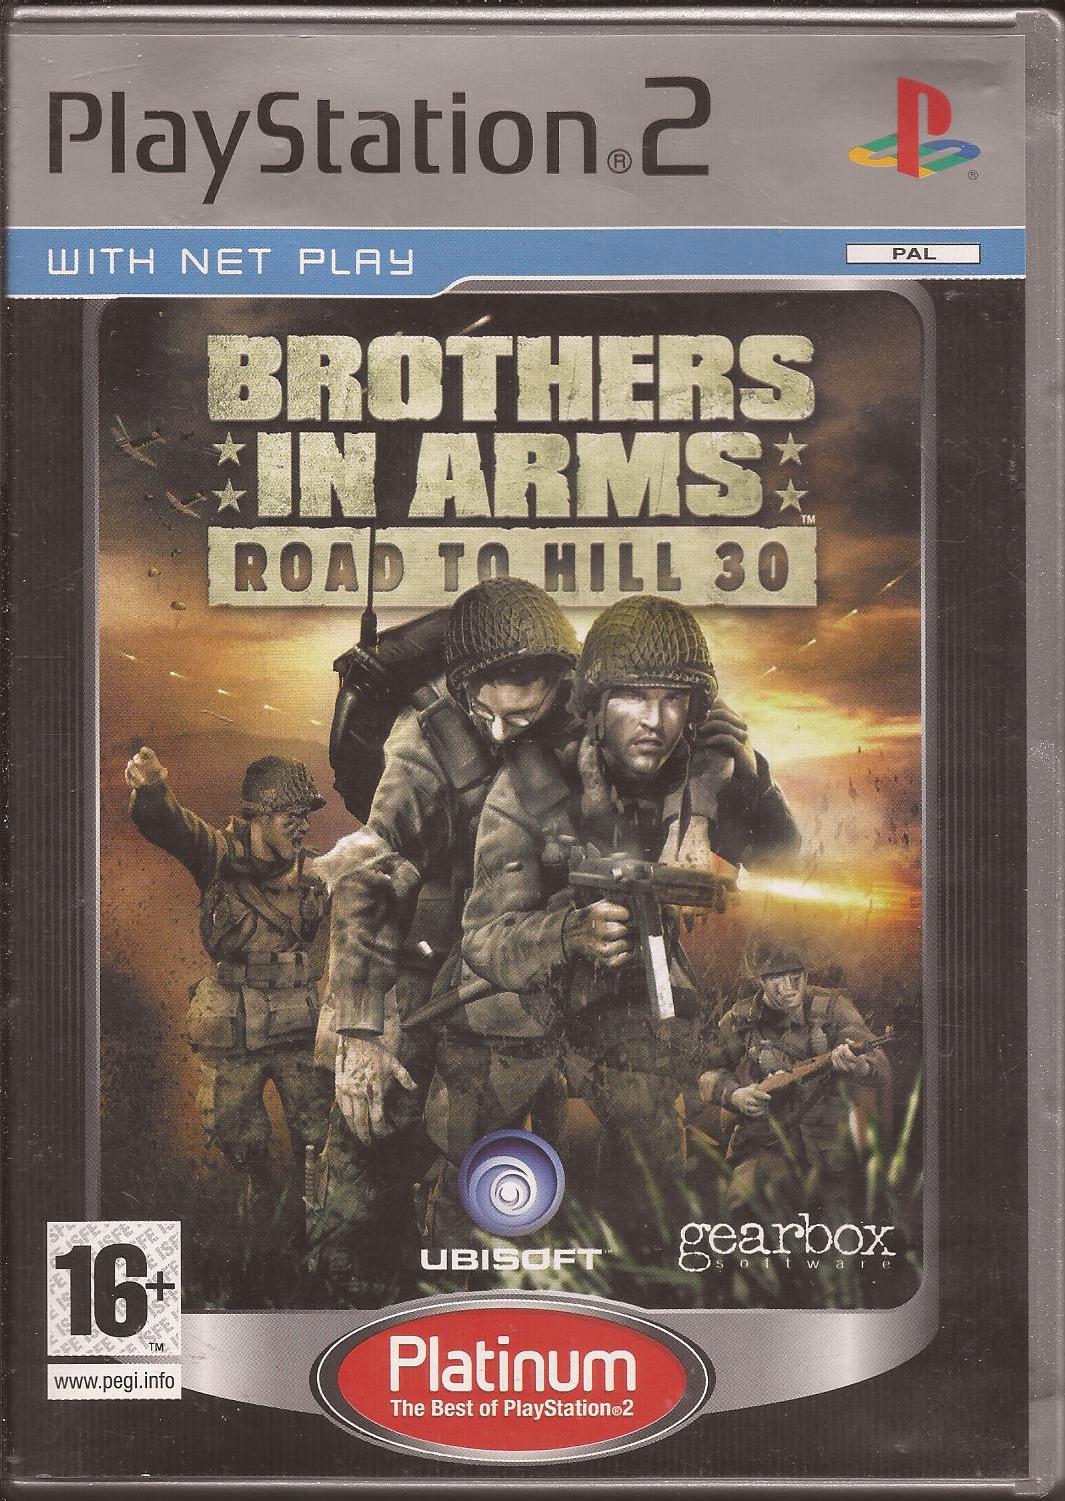 Brothers in Arms Road to Hill 30